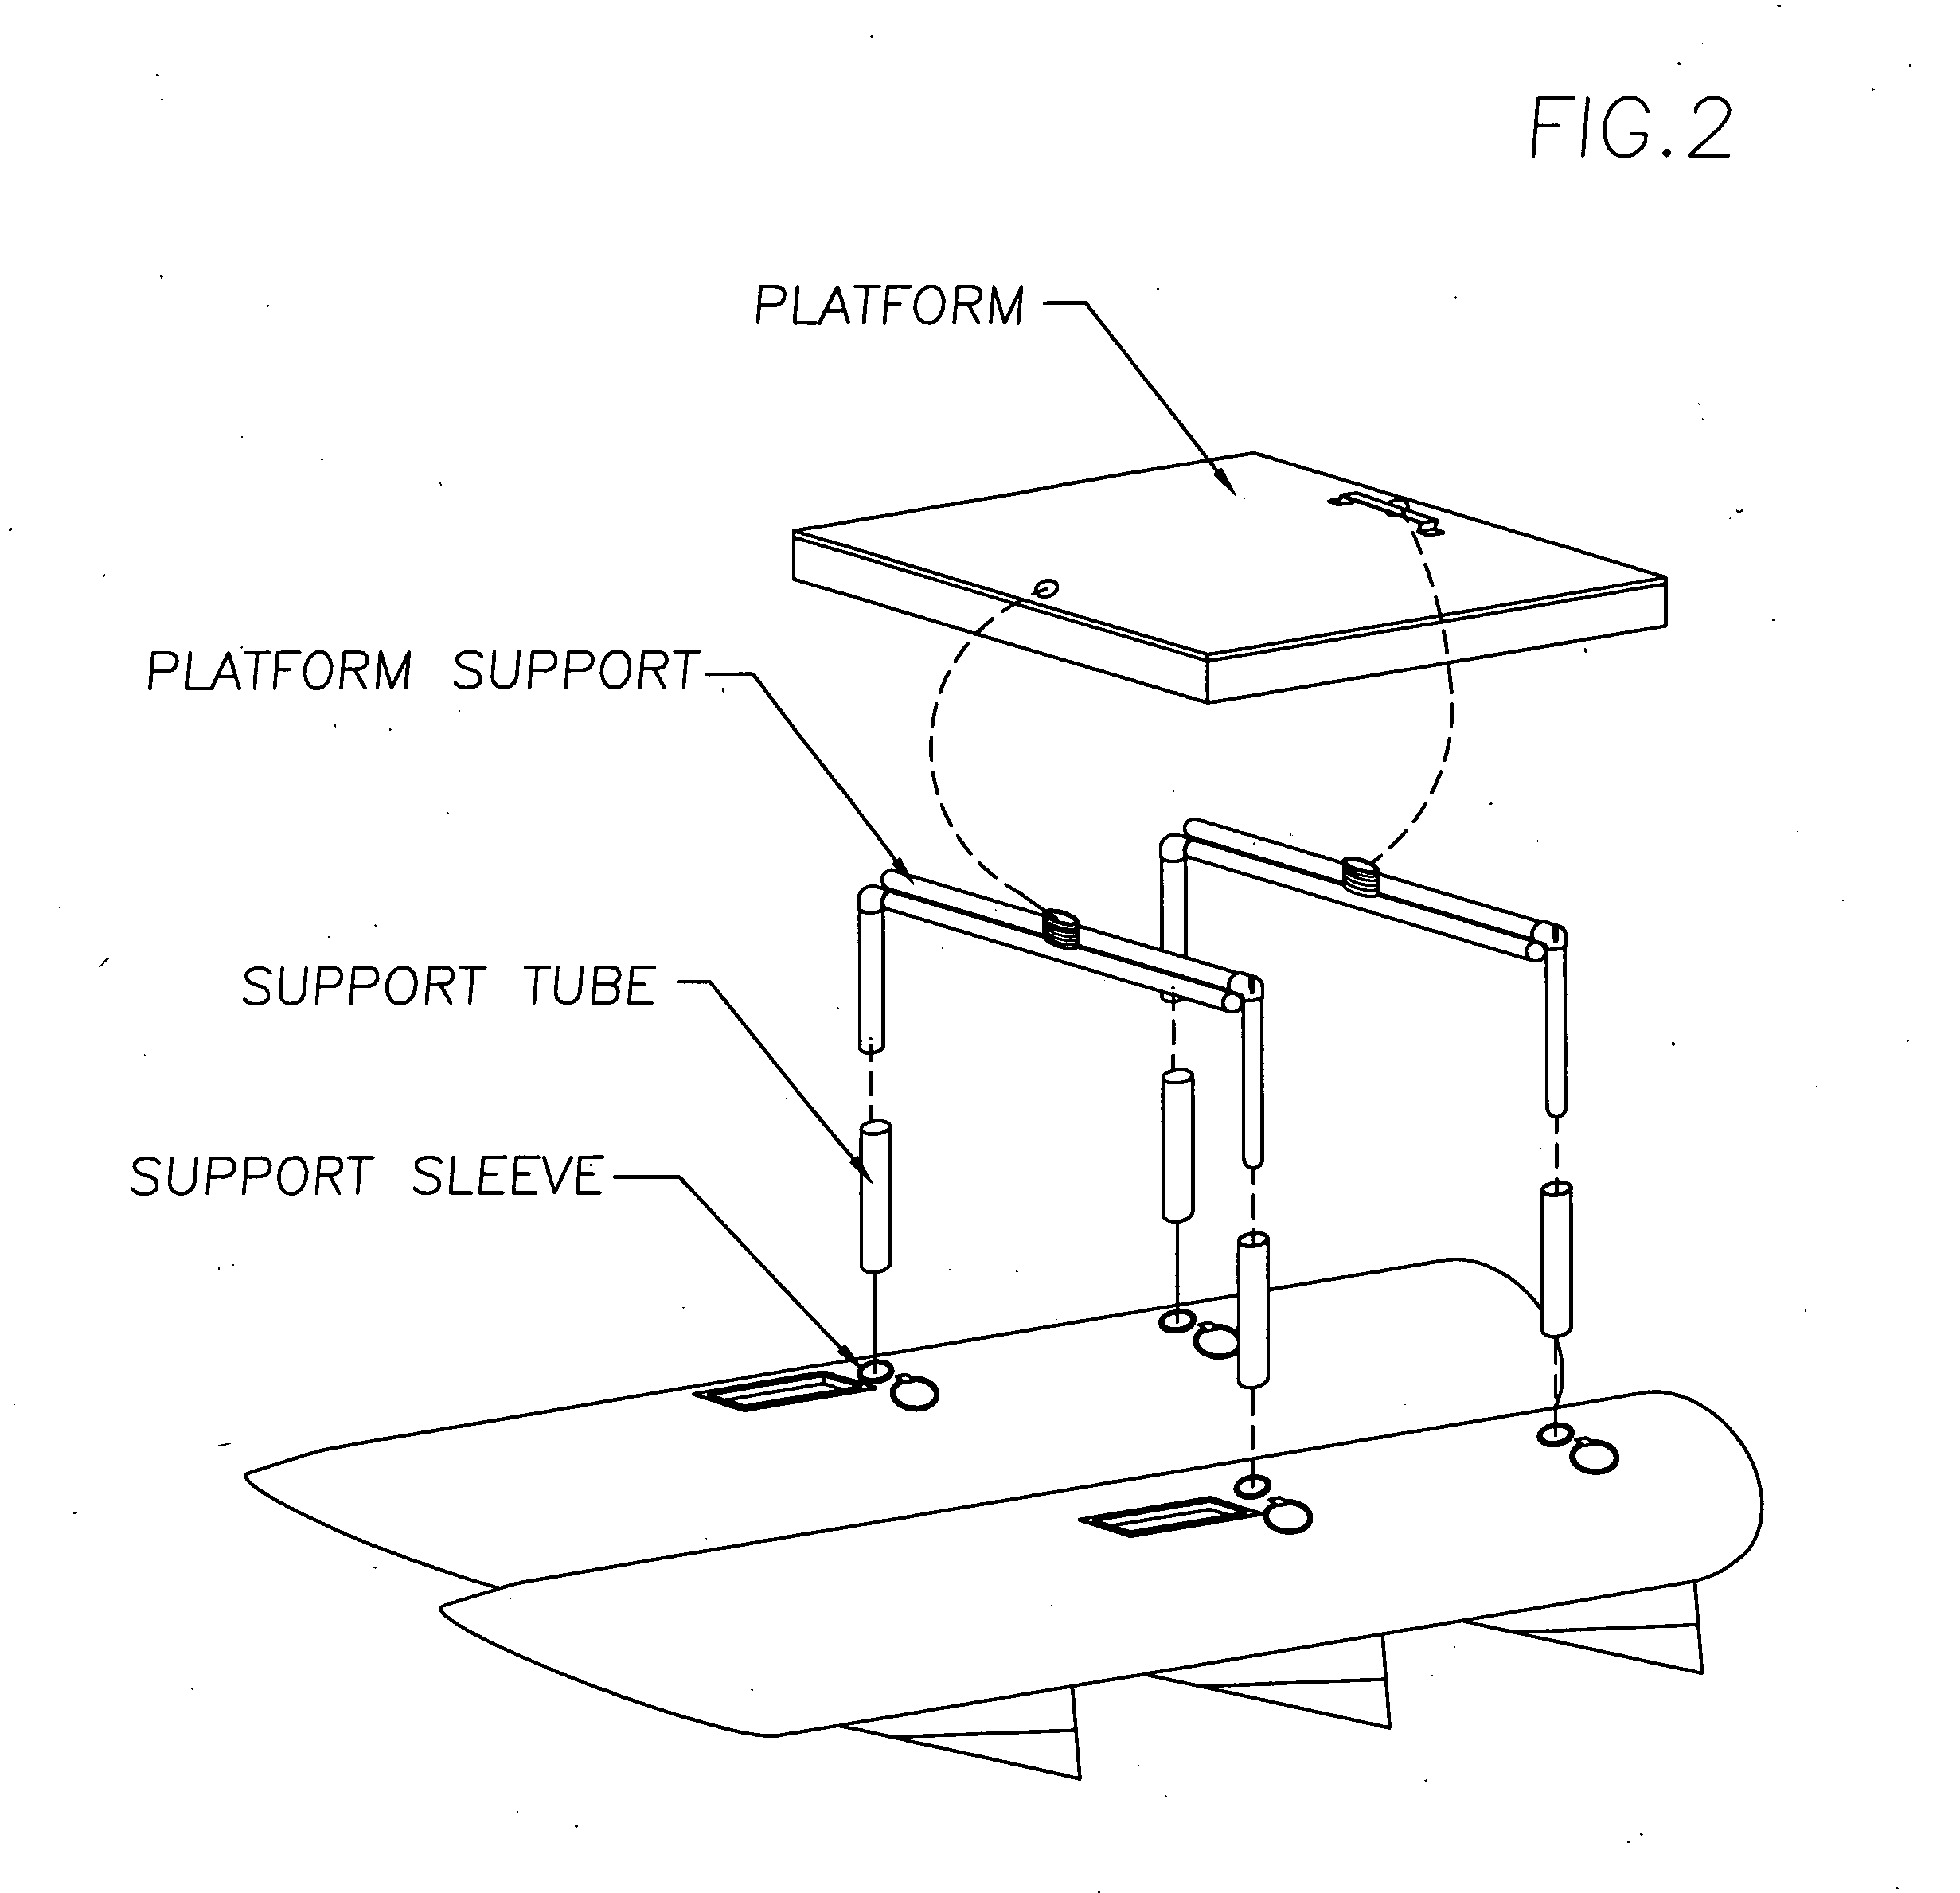 Apparatus for walking and resting upon the water